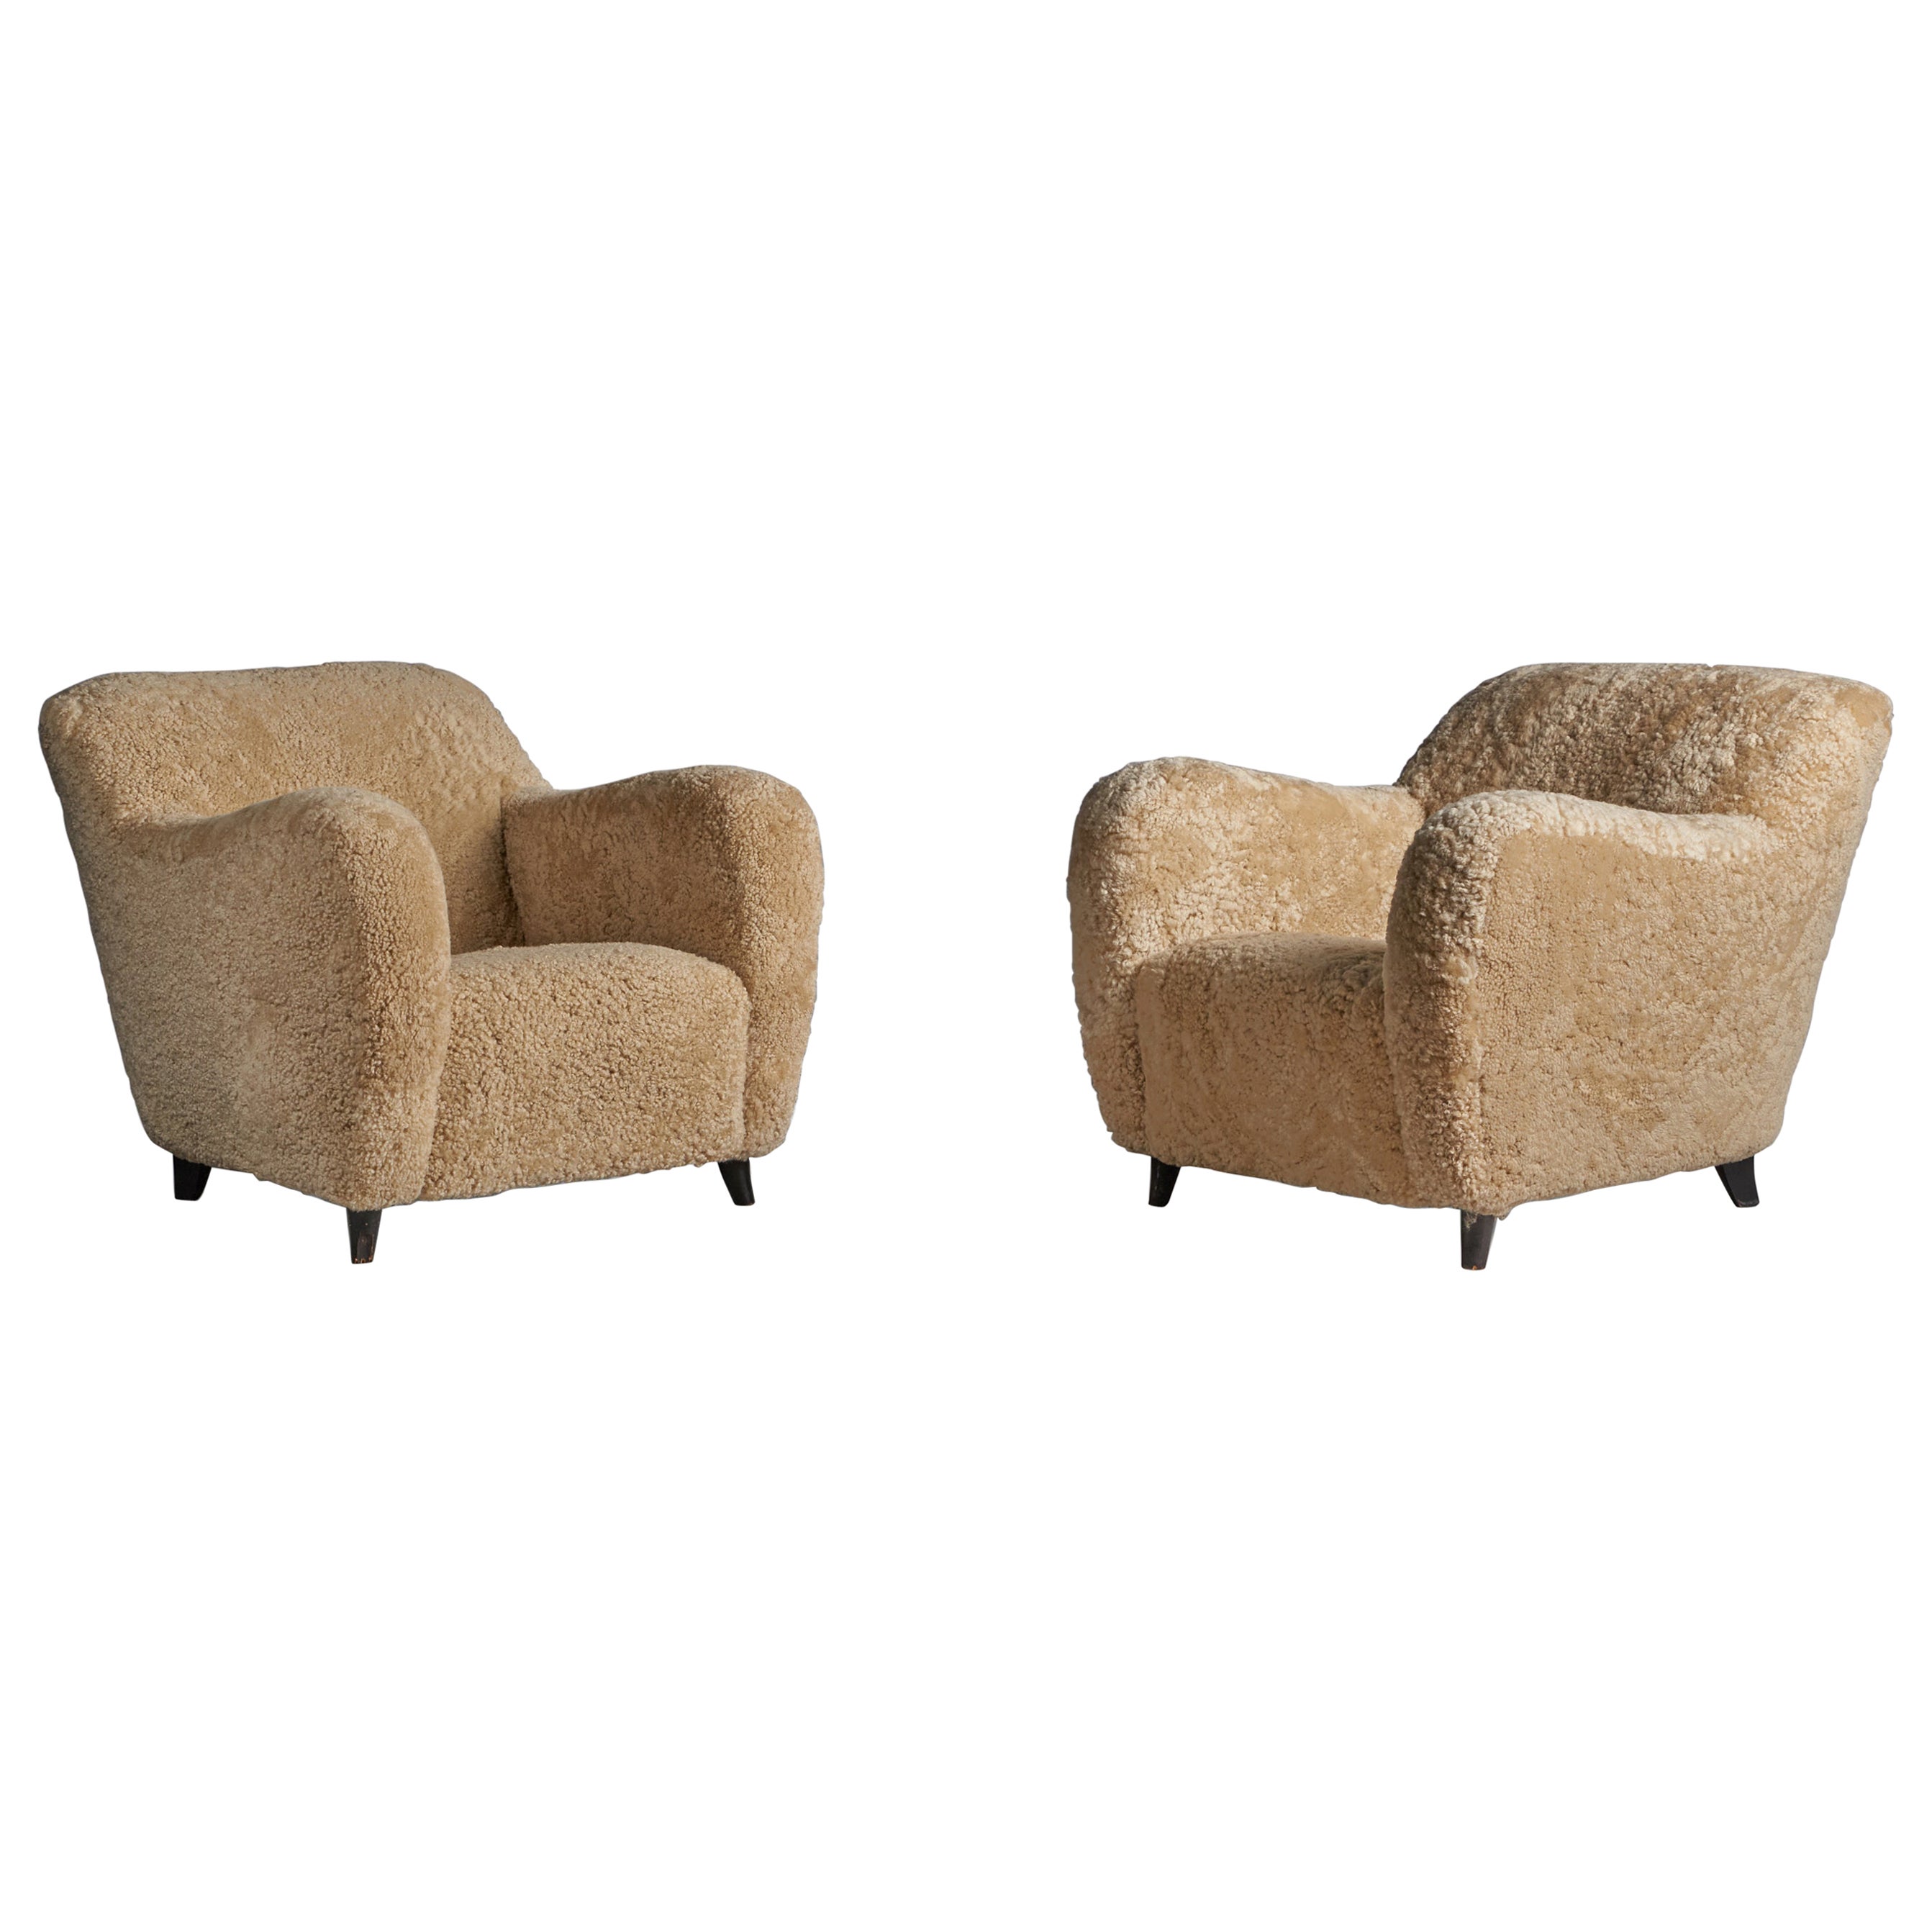 Melchiore Bega Attribution, Lounge Chairs, Shearling, Wood, Italy, 1940s For Sale